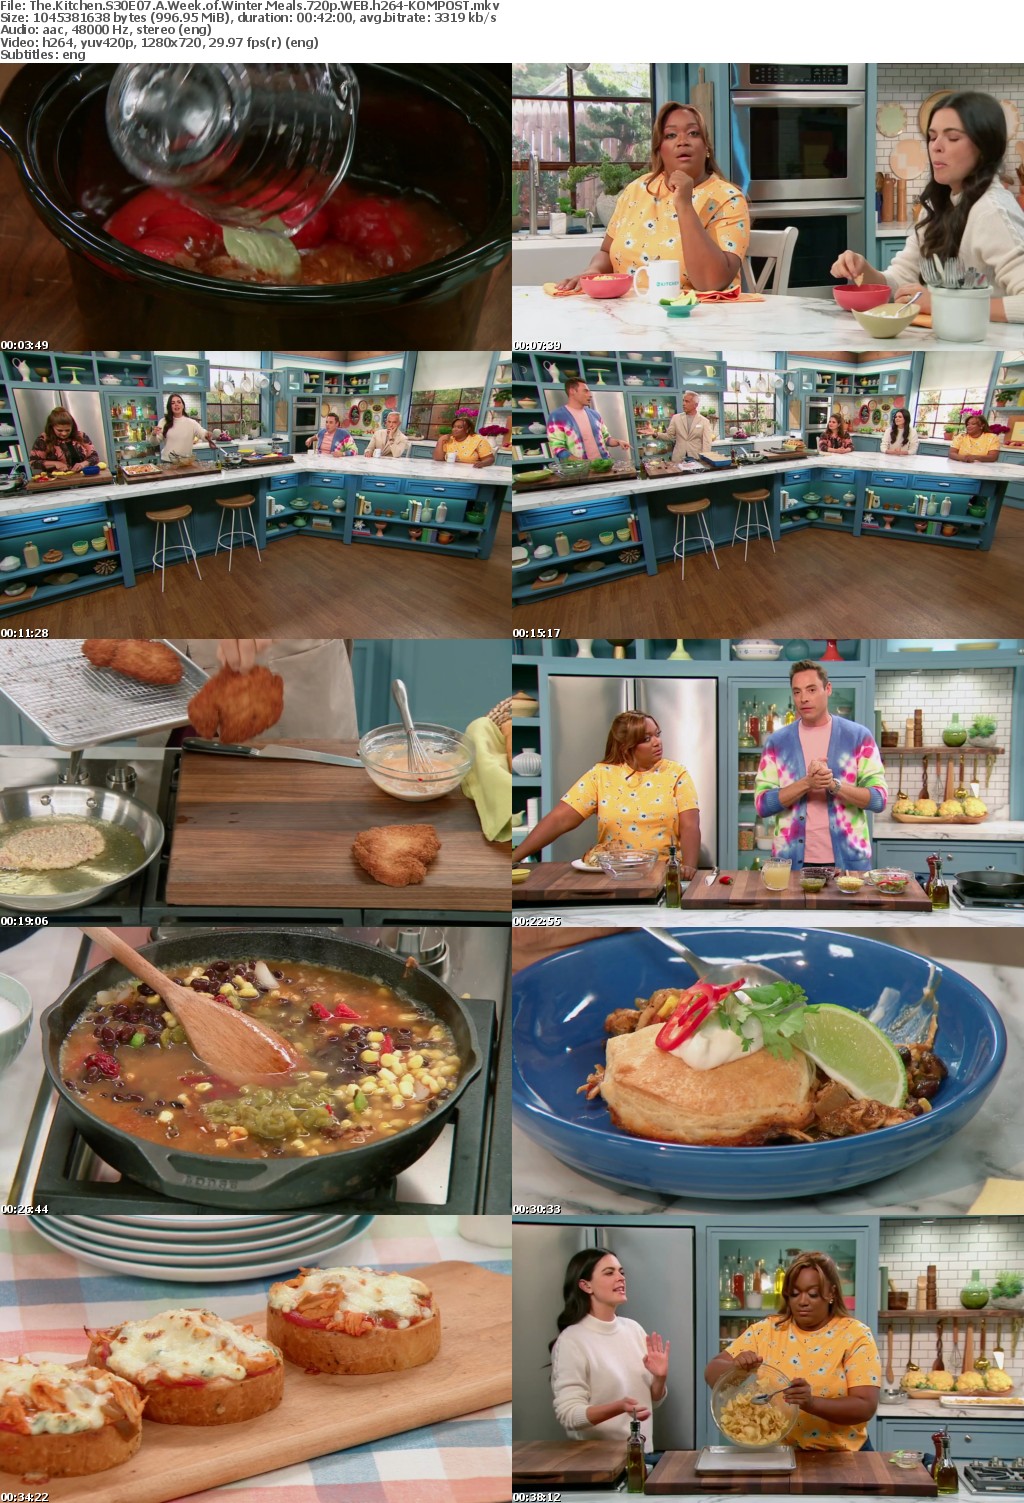 The Kitchen S30E07 A Week of Winter Meals 720p WEB h264-KOMPOST